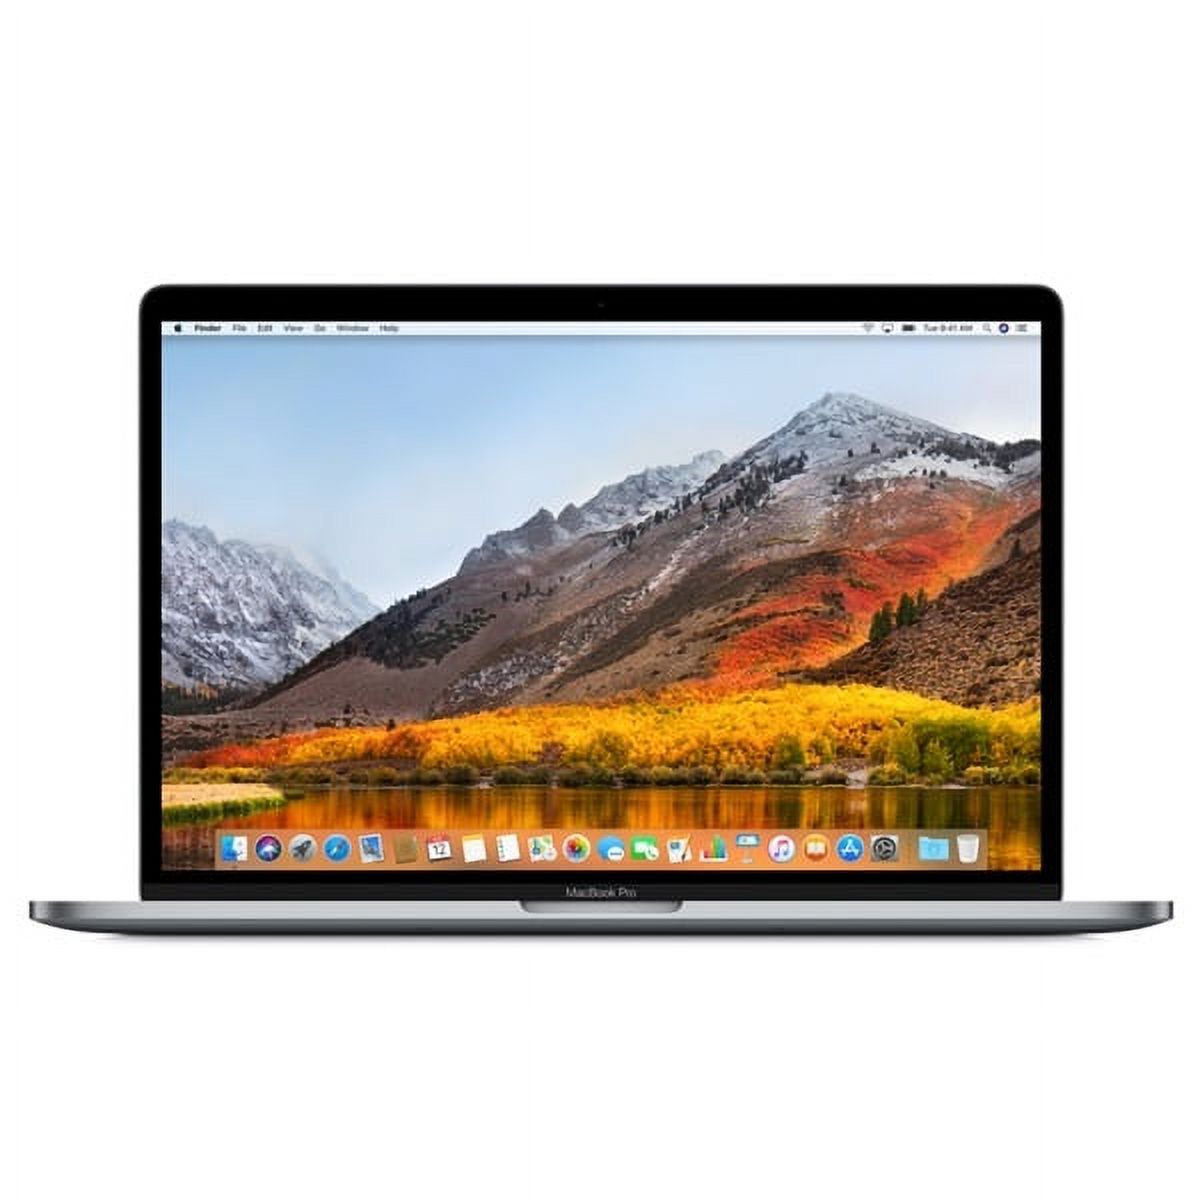 Pre-Owned Apple MacBook Pro Laptop, FHD 15" Retina Display with Touch Bar OR Touch ID45, Intel Core i7, 16GB RAM, 1TB SSD, MacOSx Catalina, Silver, MPTT2LL/A (Fair) - image 4 of 4